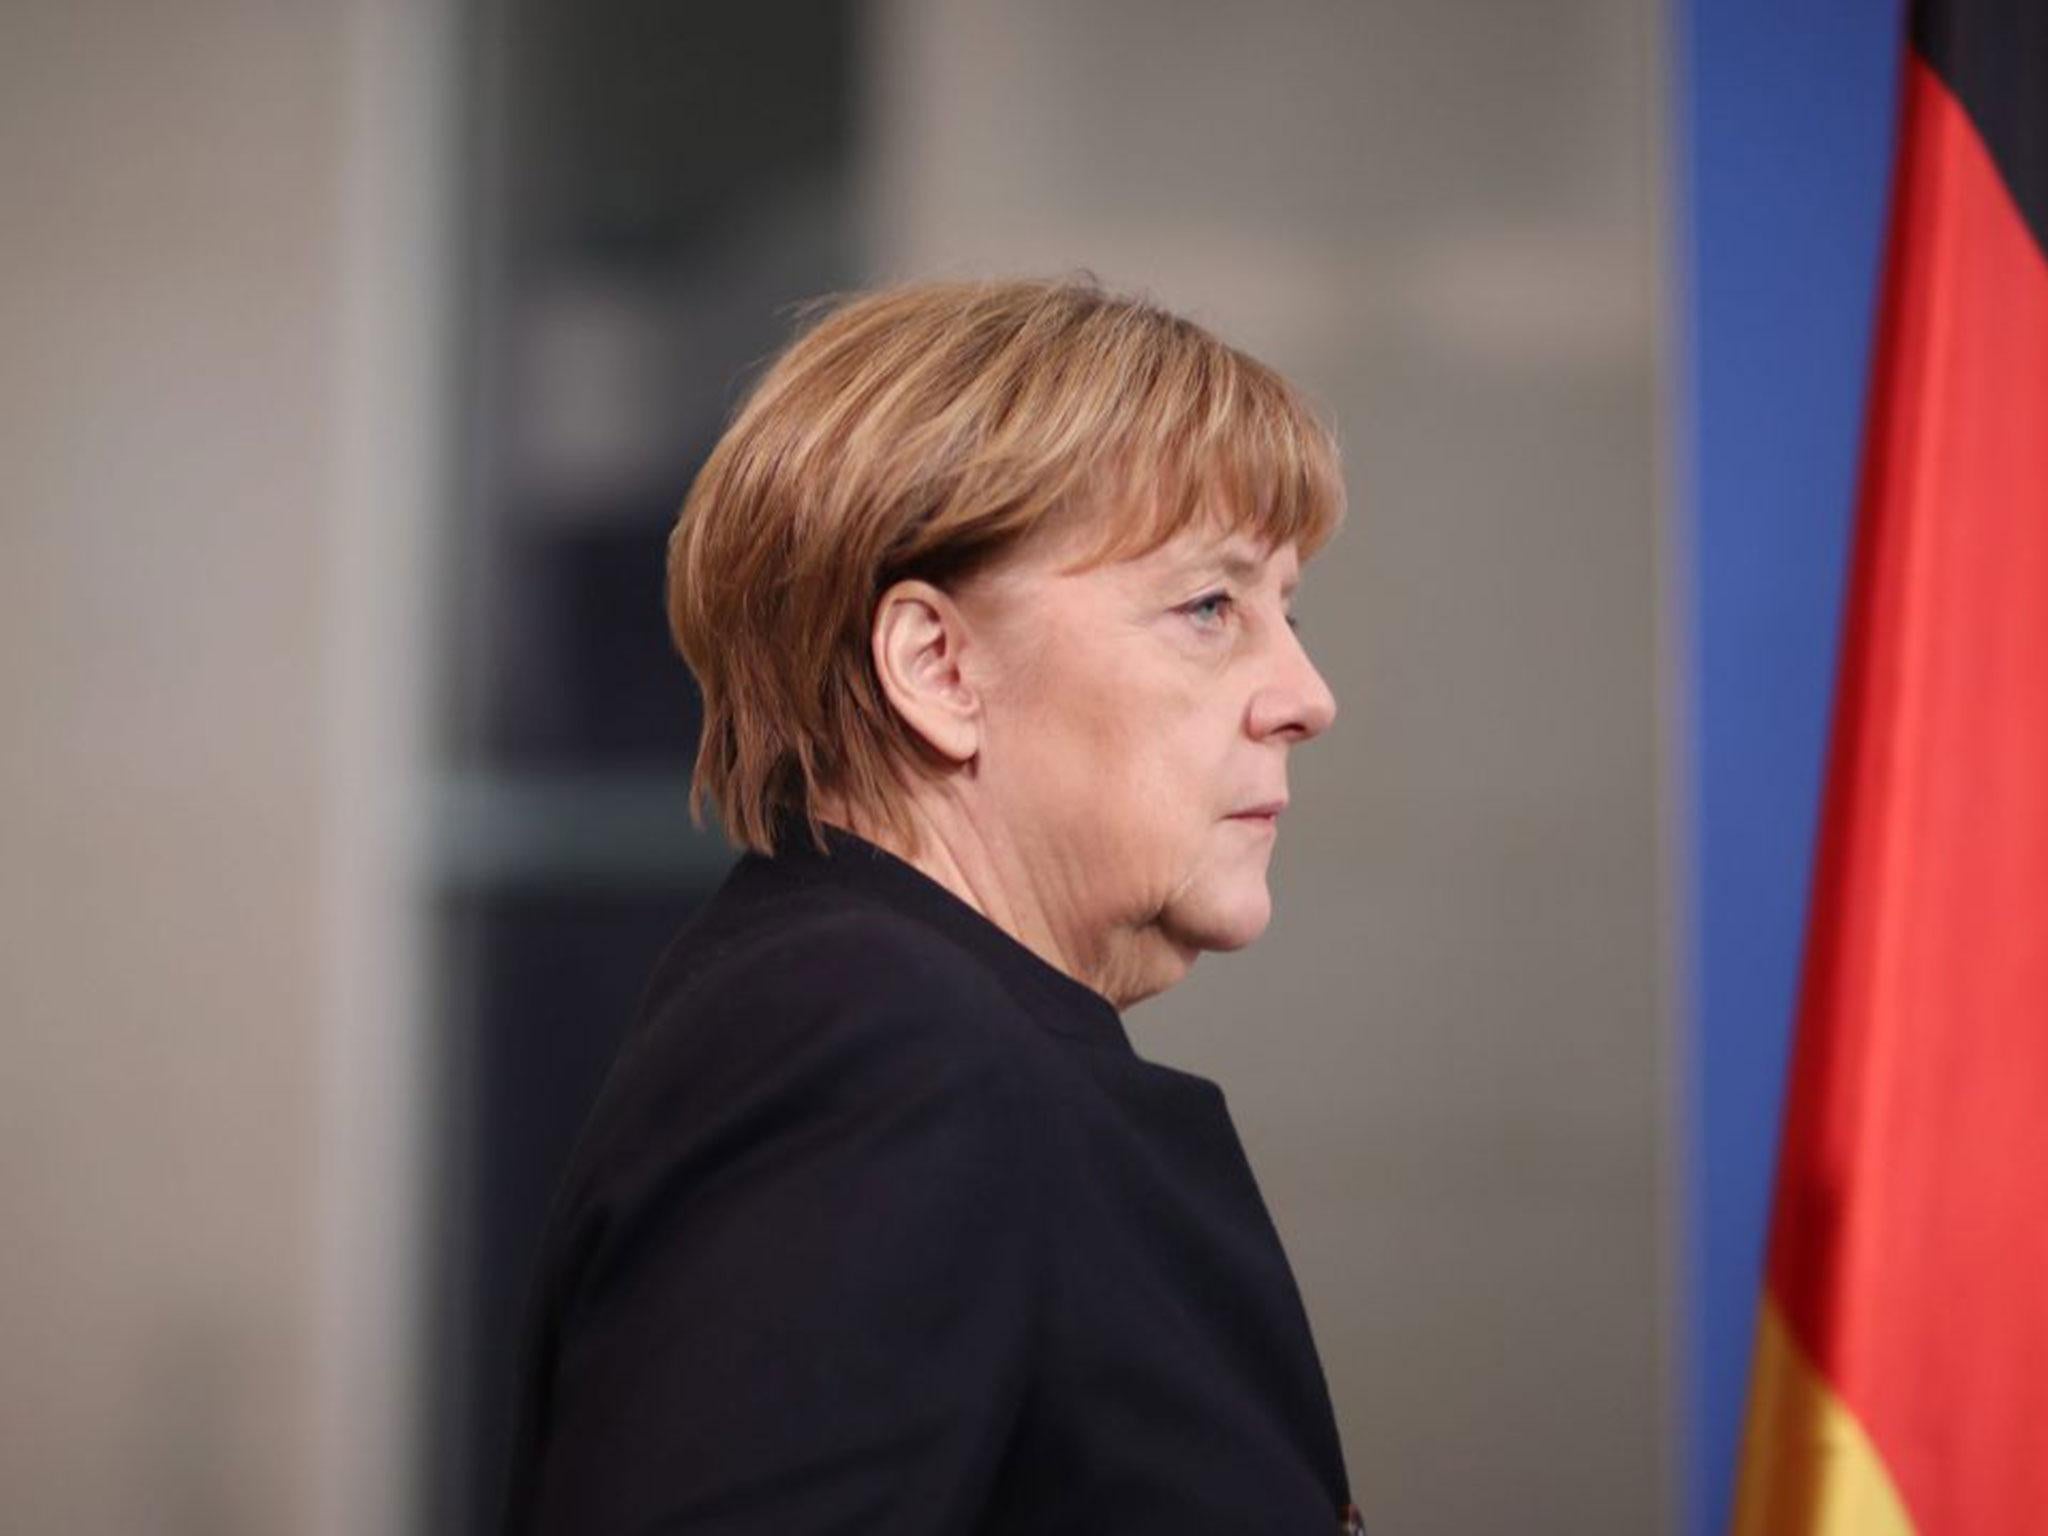 German Chancellor Angela Merkel came under political pressure following the attack